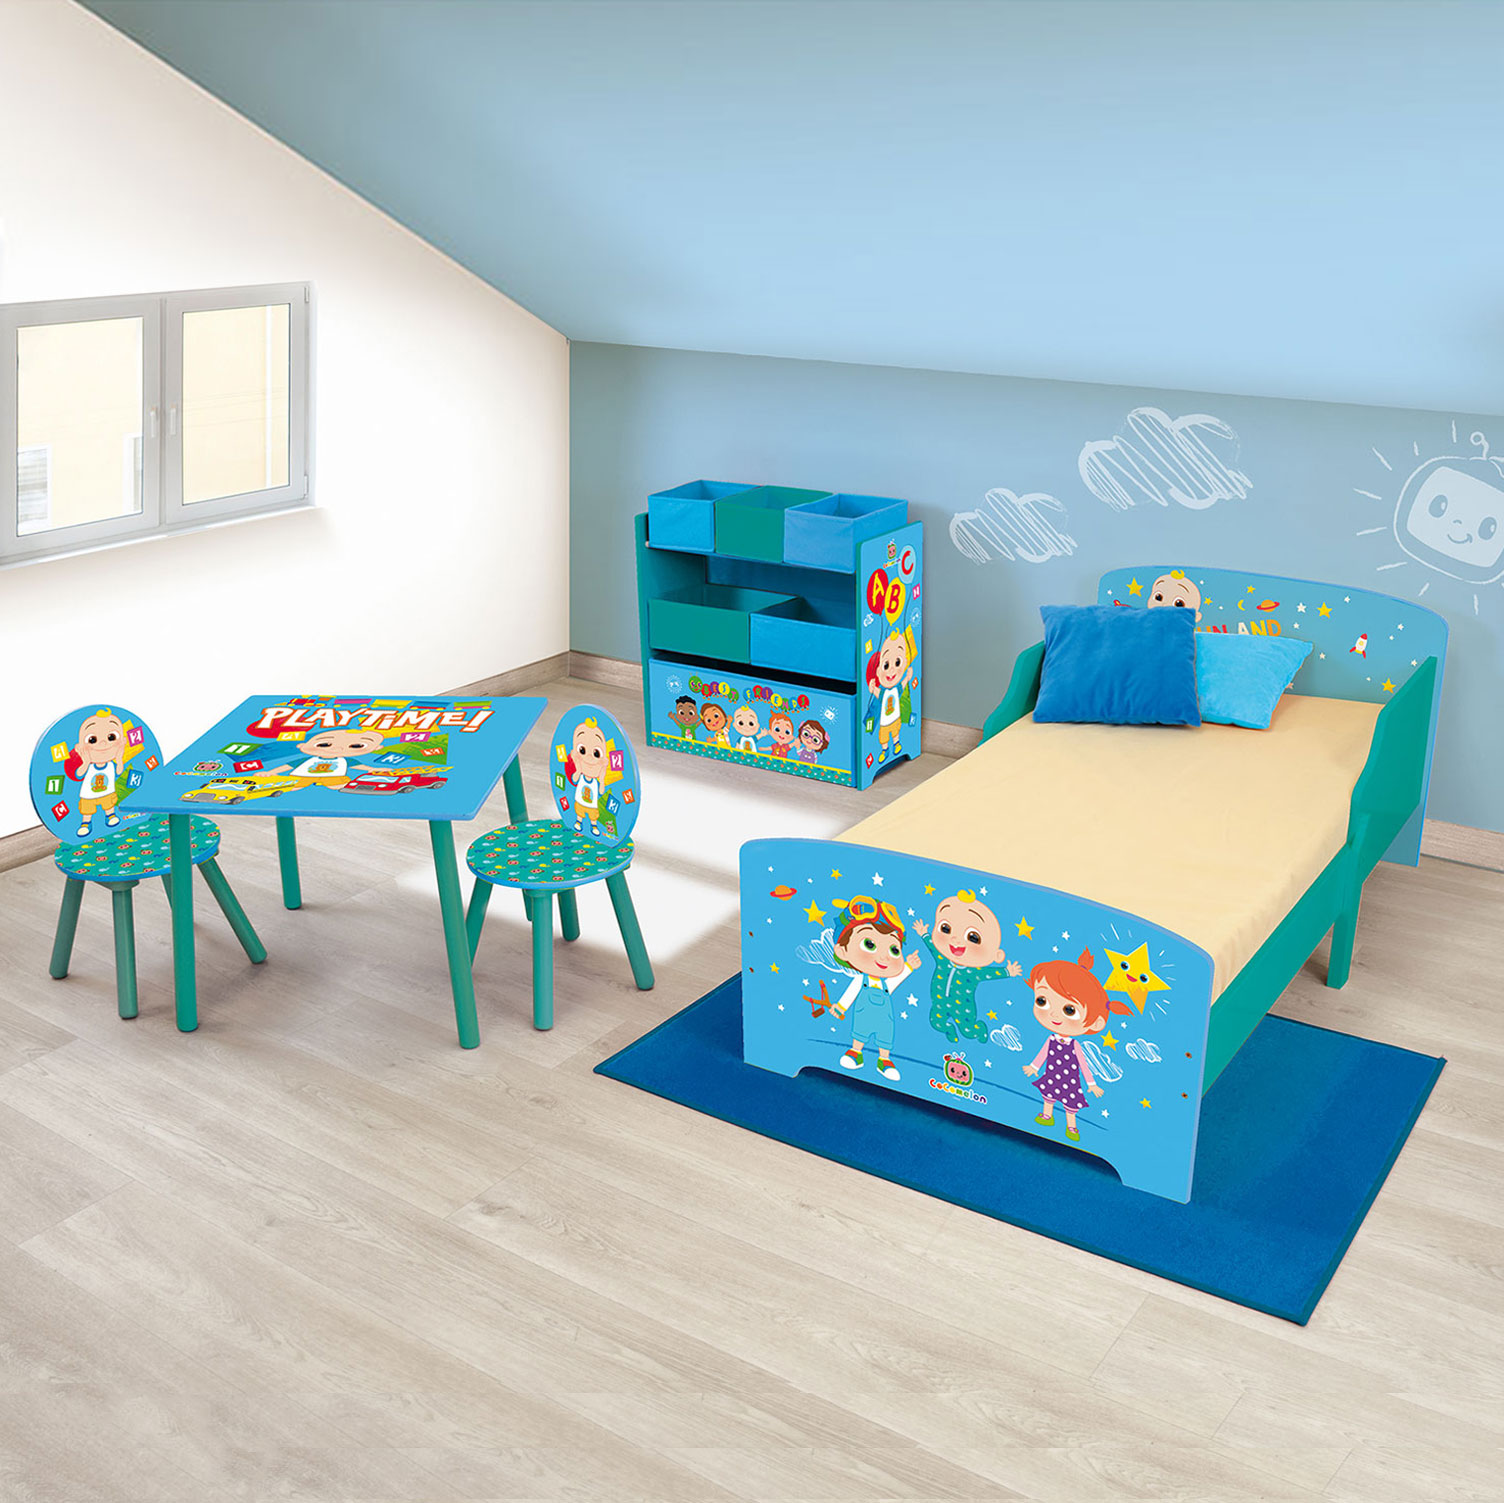 Cocomelon Wooden Junior Toddler Bed, Toy Organiser and Table & Chairs Set – Blue